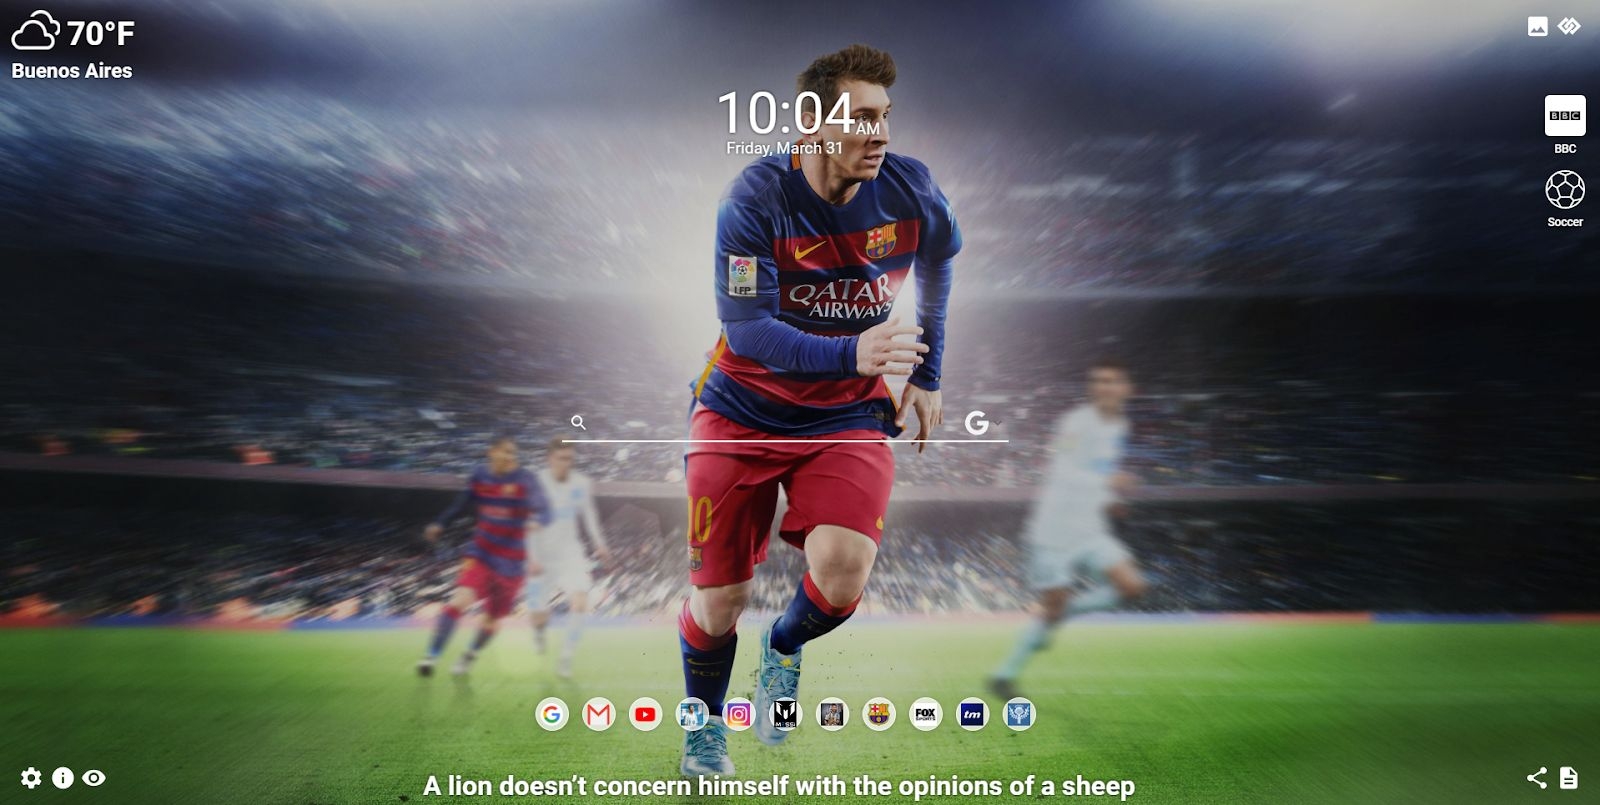 Celebrating Lionel Messi: Mesmerizing Wallpapers on MeaVana for Football Fans